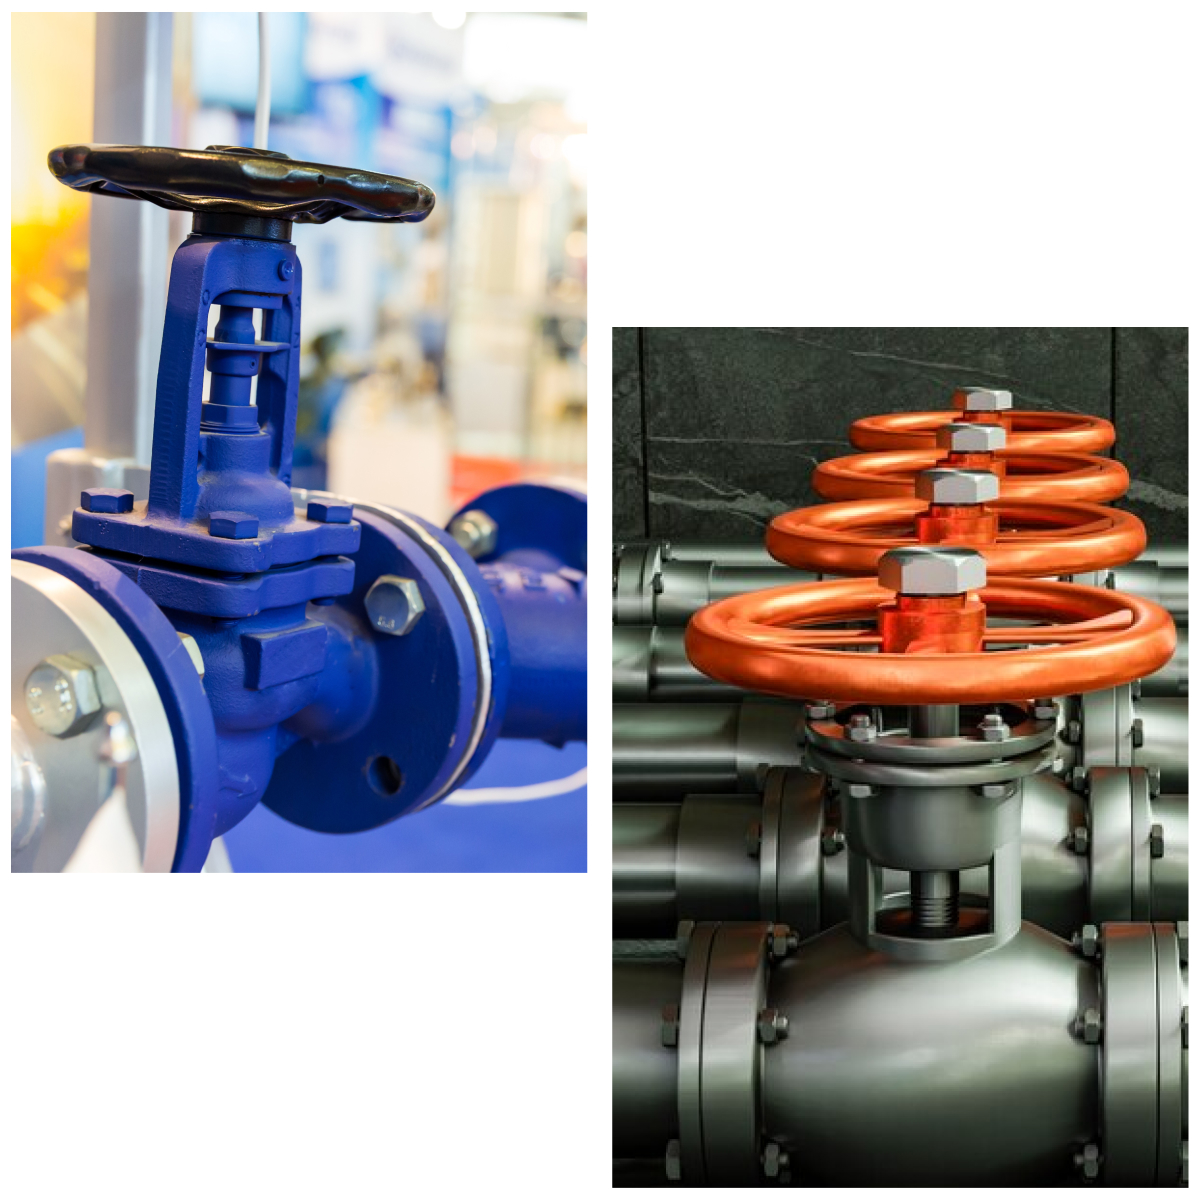 A collage image with industrial globe valves from AlterValve. 